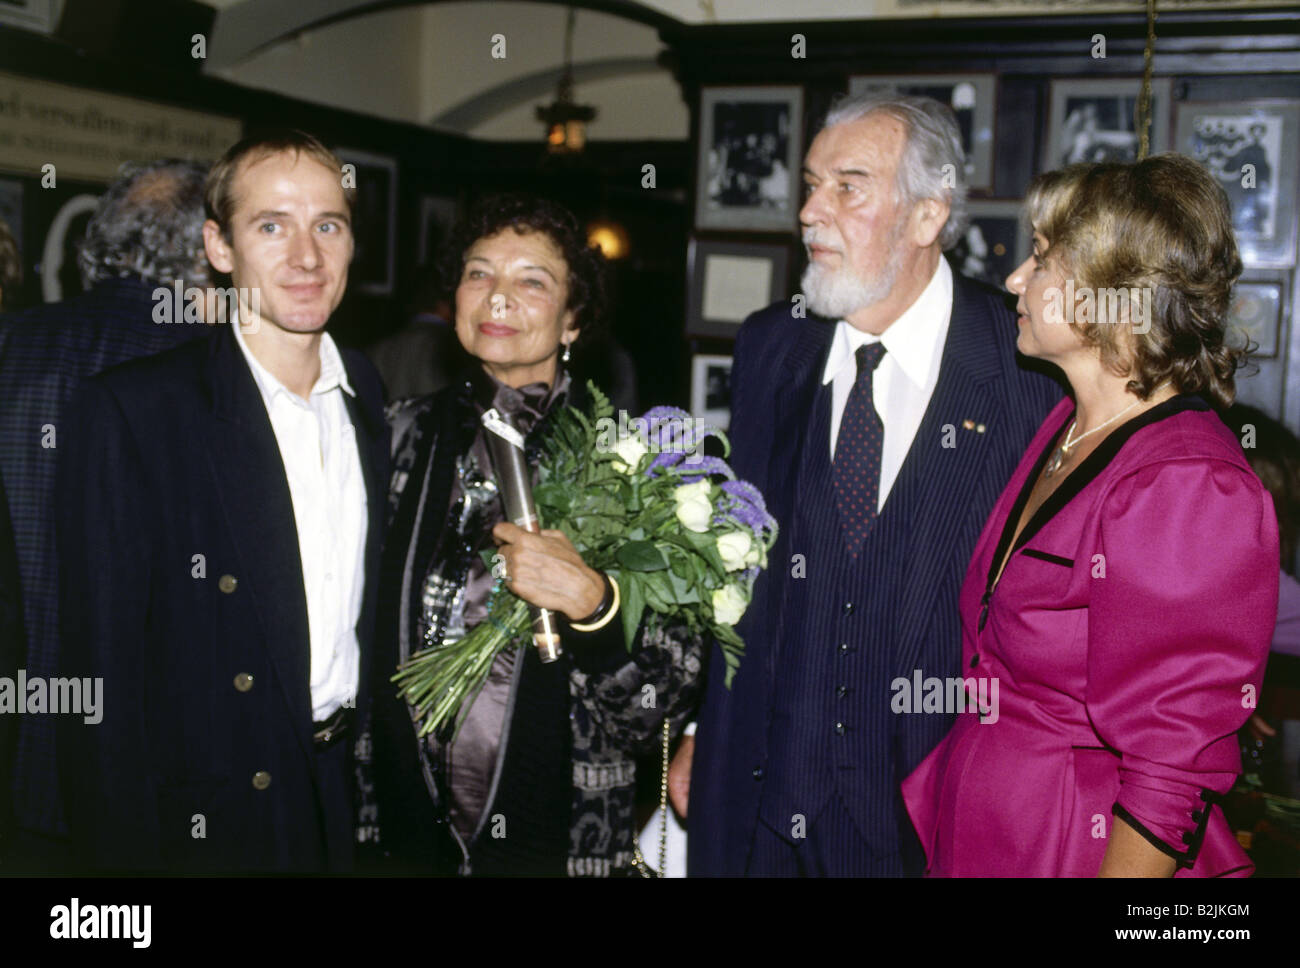 Mühe, Ulrich, 20.6.1953 - 22.7.2007, German actor, half length, with Agnes Fink, Bernhard Wicki and Elisabeth Endriss, 1980s, Stock Photo